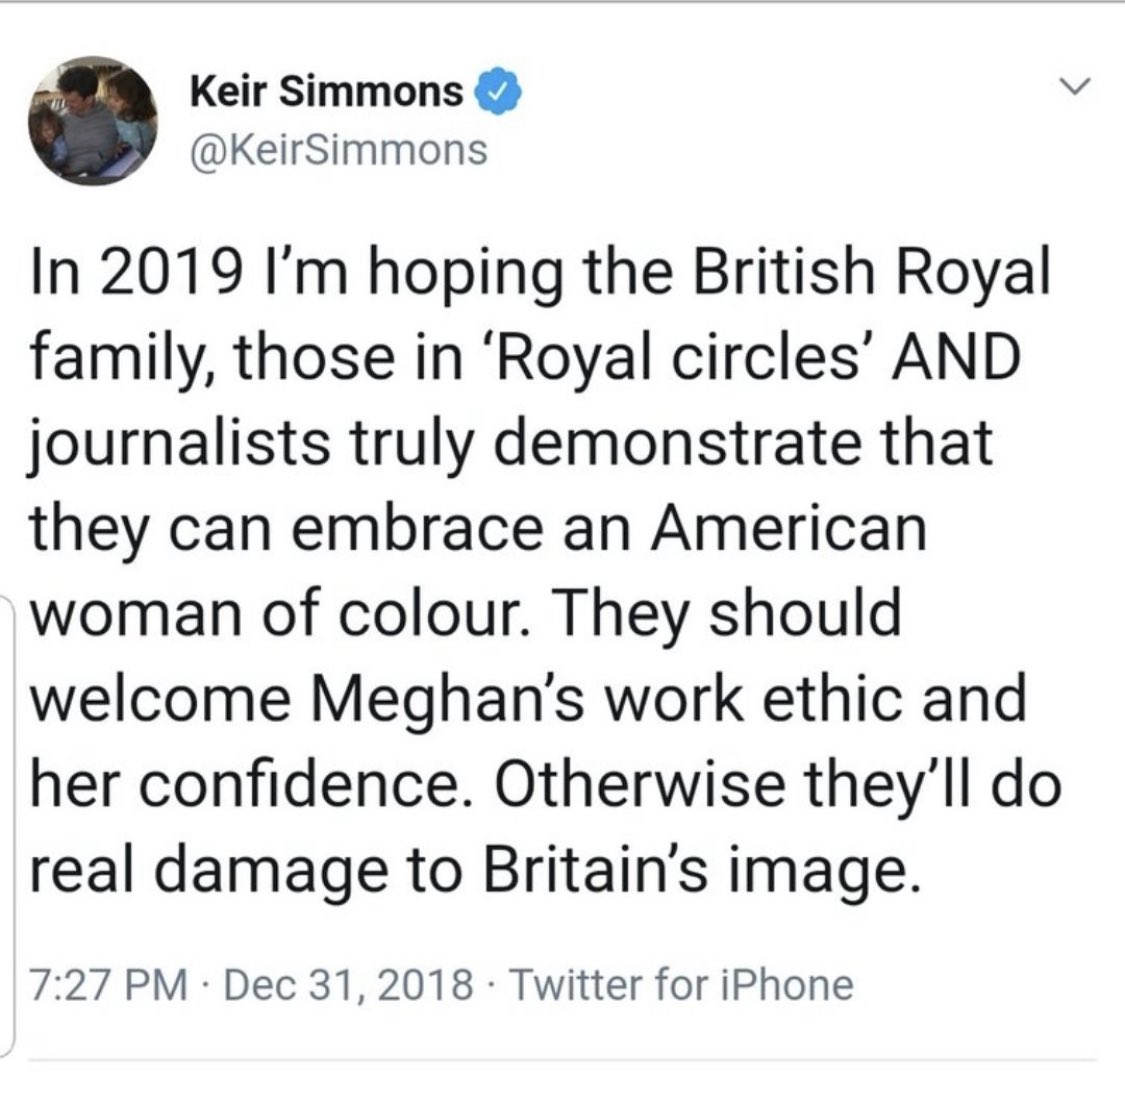 Many of us fought desperately hard to make @KeirSimmons point directly to the UK media. We were ridiculed for doing so, and still are. #FAFO